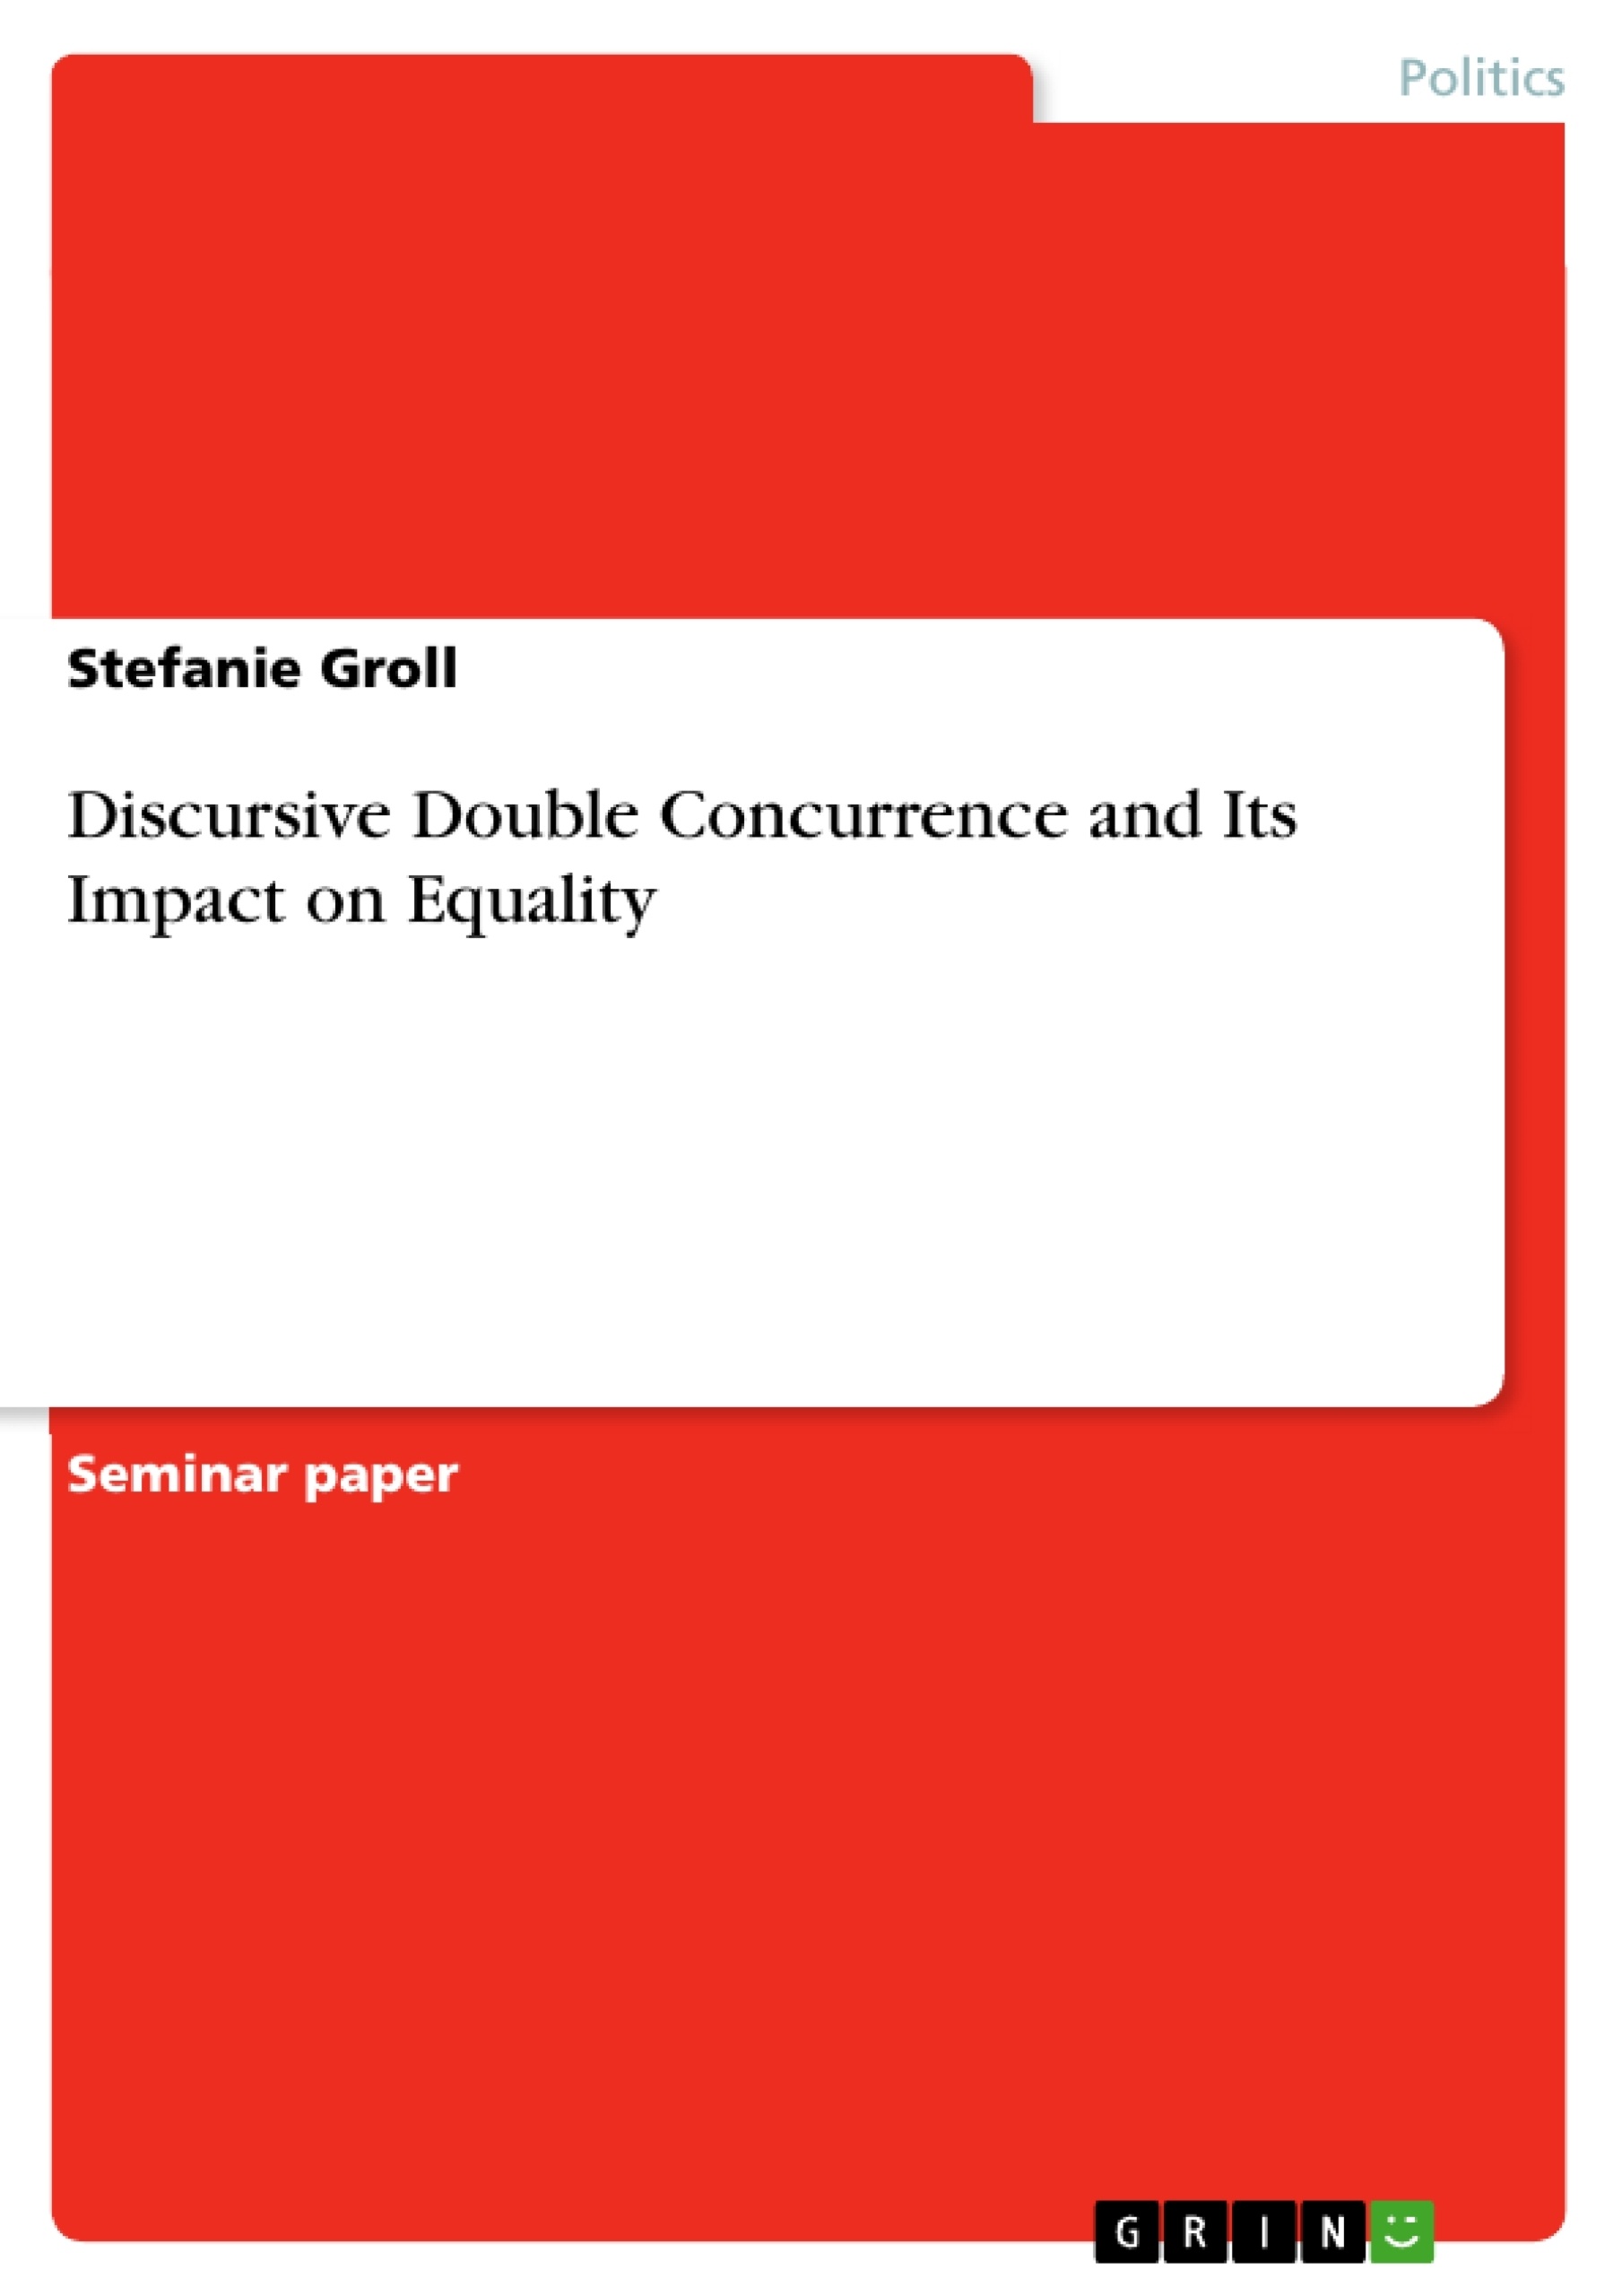 Titel: Discursive Double Concurrence and Its Impact on Equality